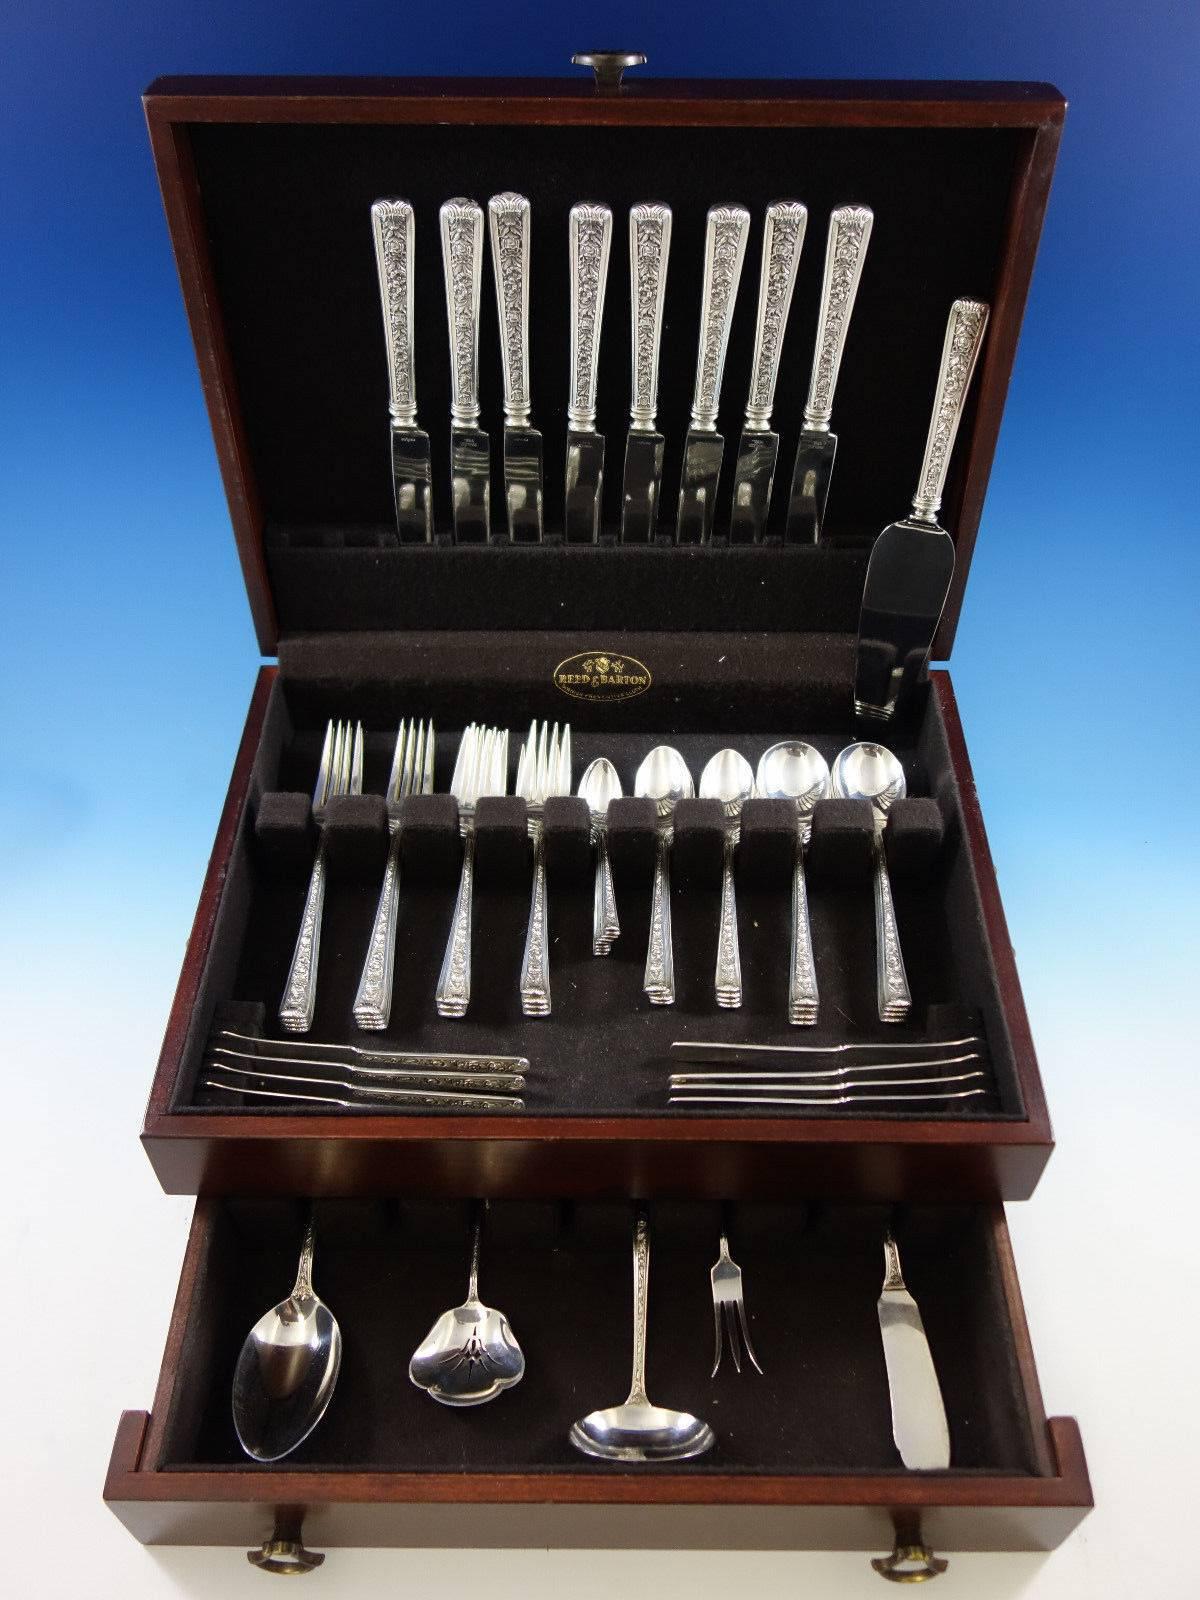 Windsor Rose by Watson sterling silver flatware set of 62 pieces. This set includes: 

Eight knives, 9 1/4